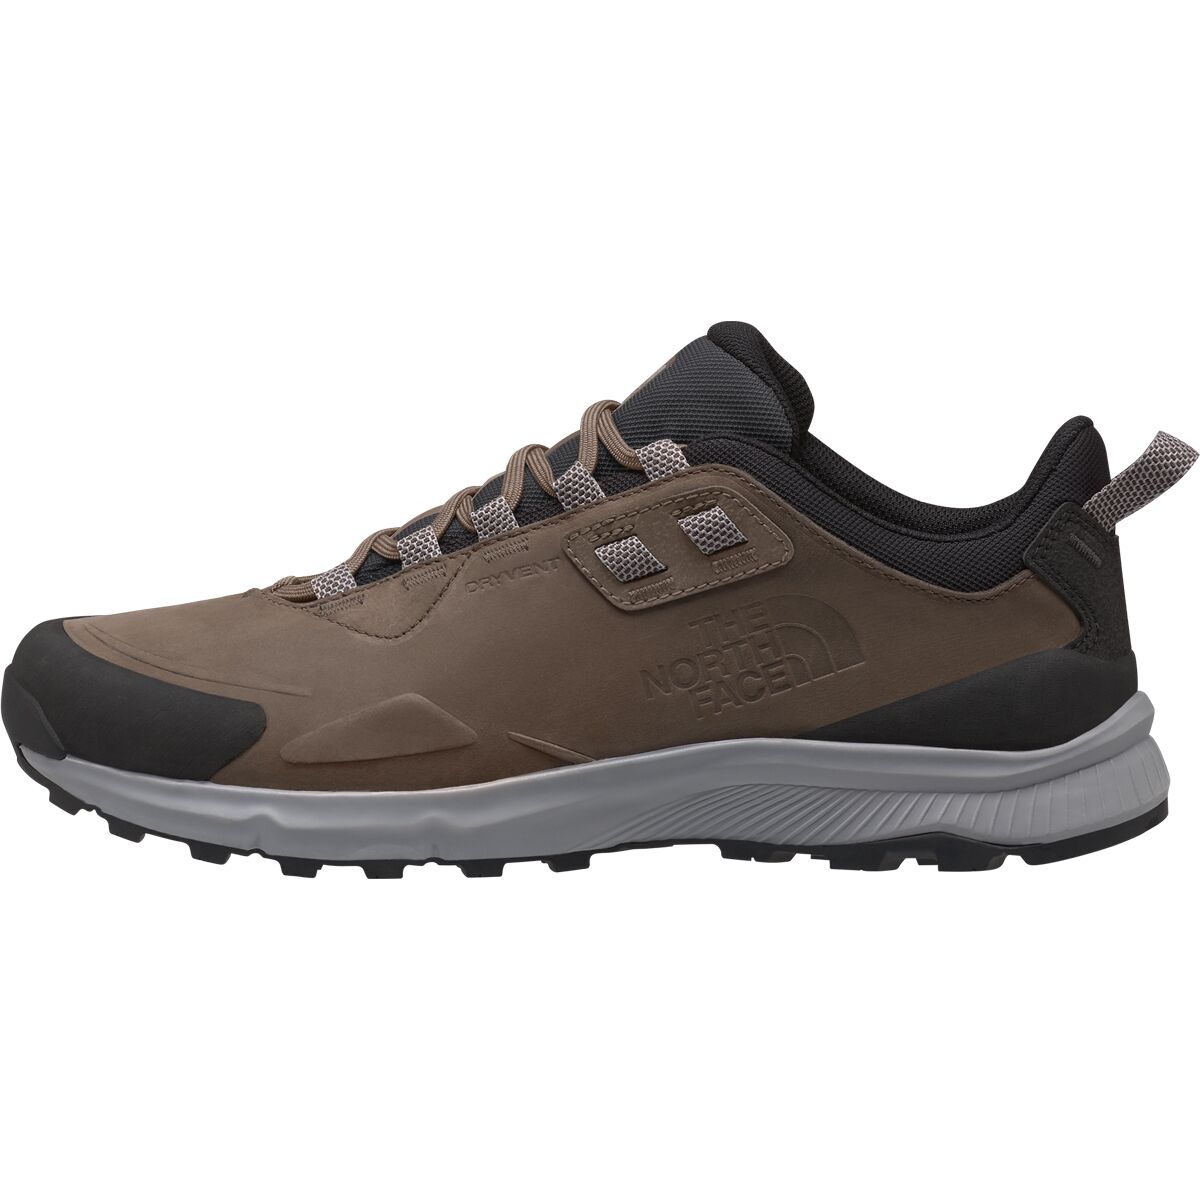 The North Face Cragstone Leather WP Hiking Shoe - Men's